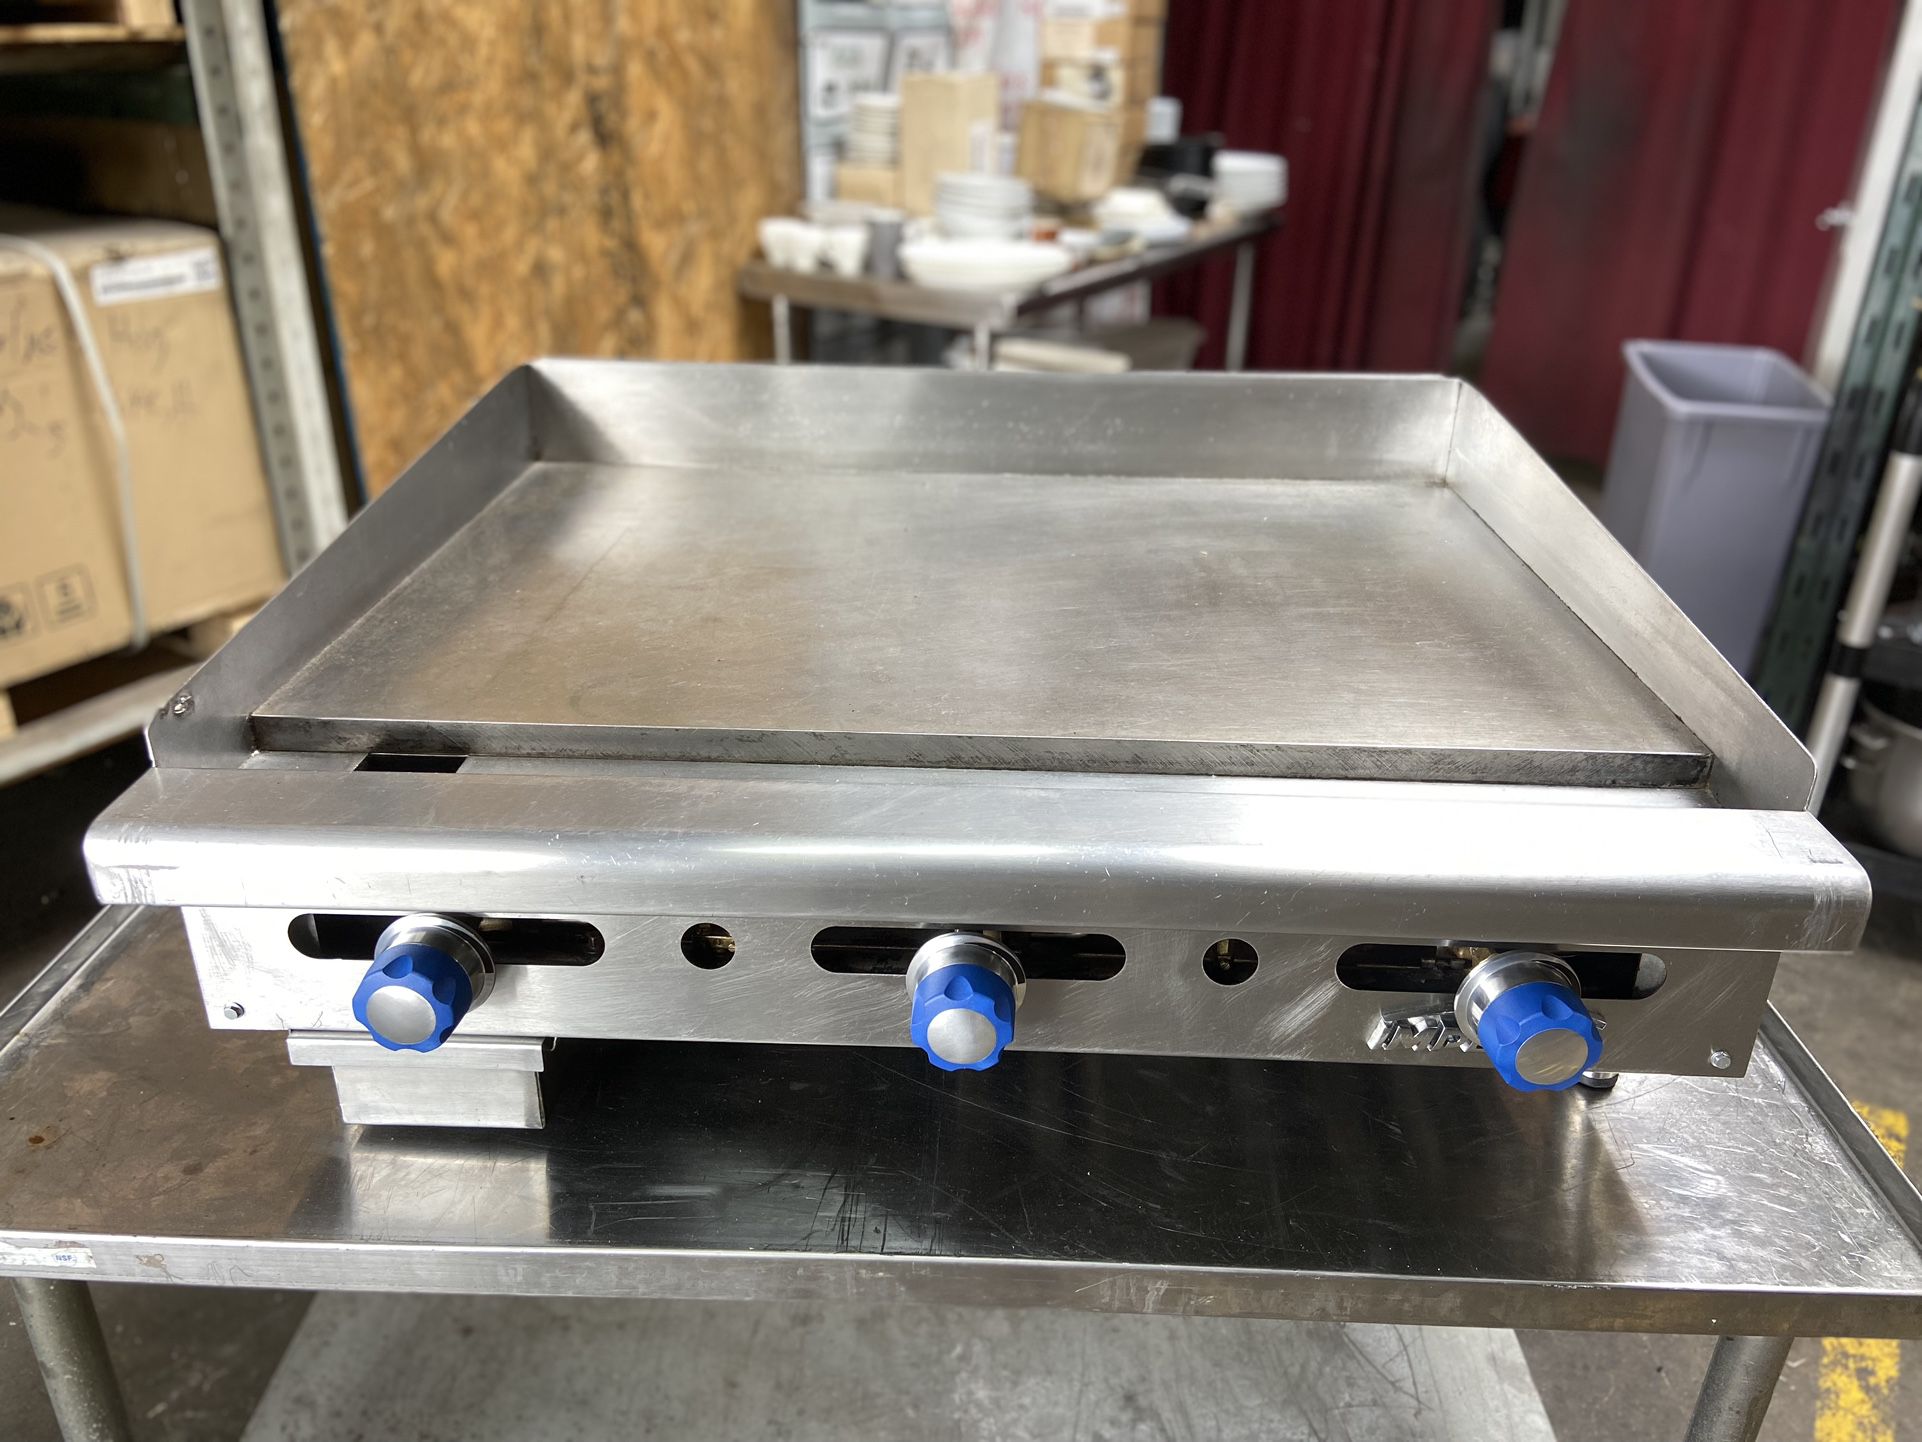 36” Gas Griddle Imperial IMGA-3628 Plancha Flat Top Grill Commercial Heavy Duty Great Condition And Works Perfect Restaurant Kitchen Equipment 